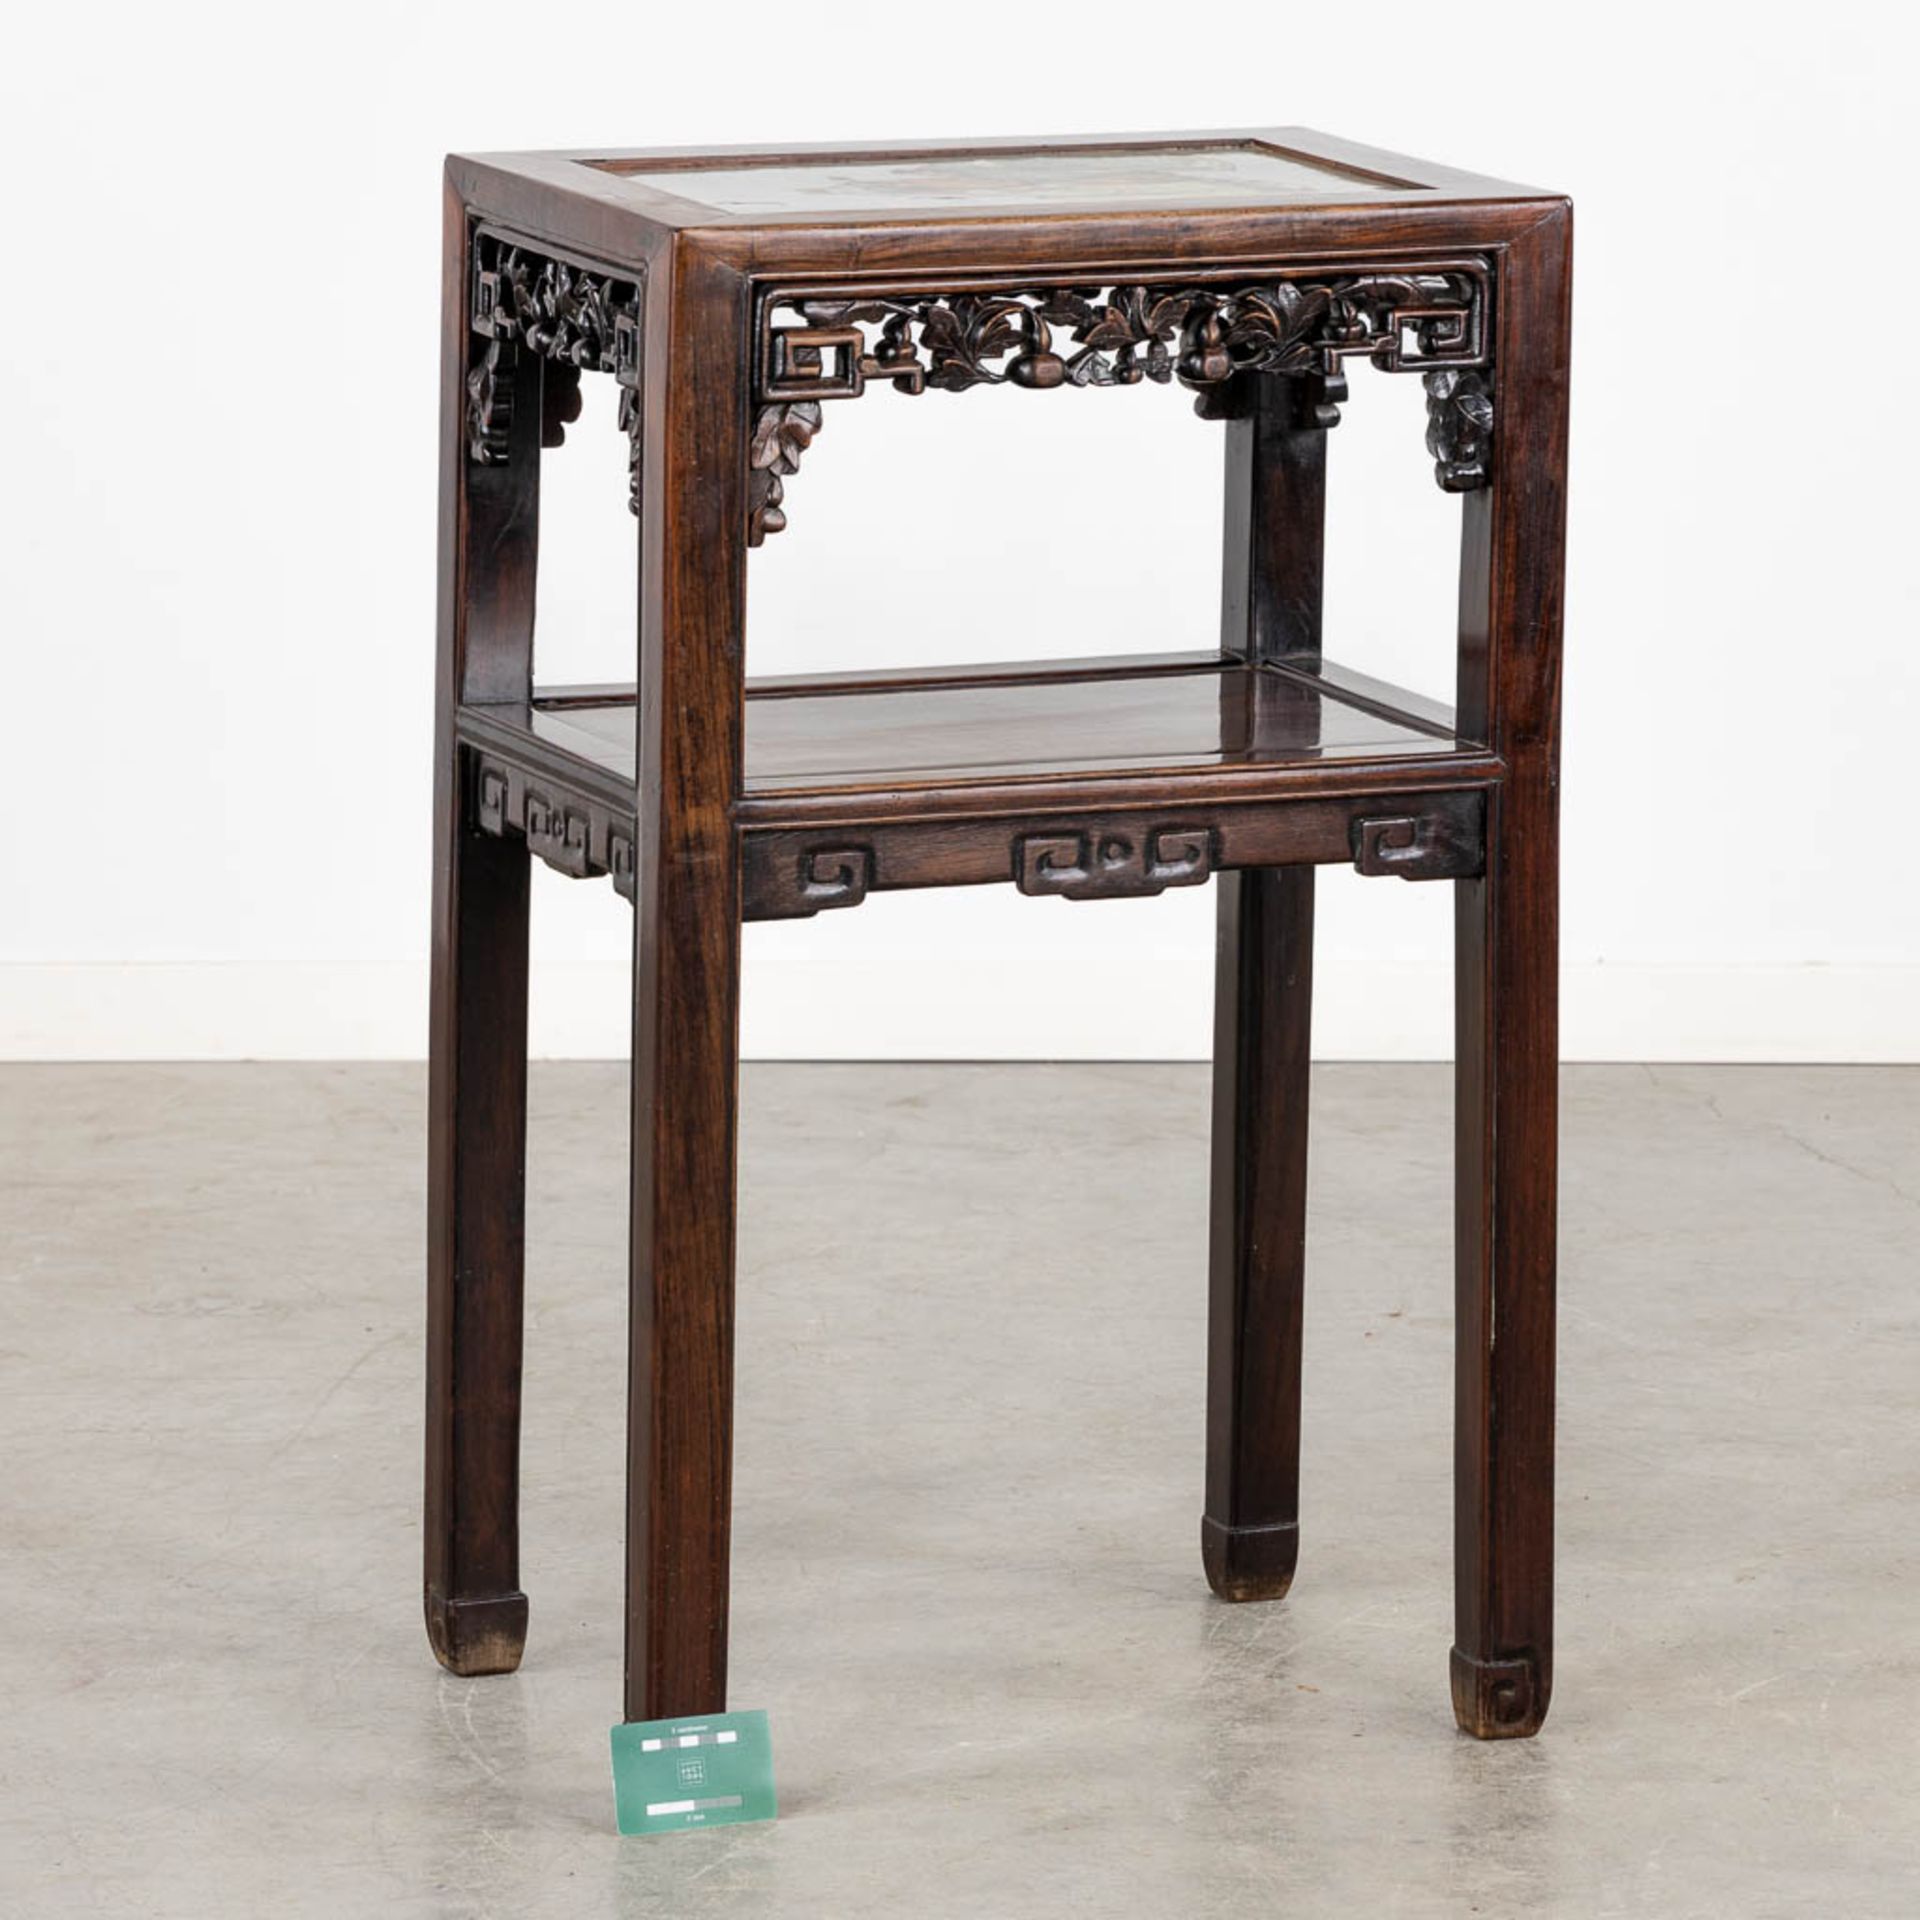 A Chinese side table with a porcelain plaque of Fu Lu and Shou. (L:34 x W:48 x H:80 cm) - Image 2 of 10